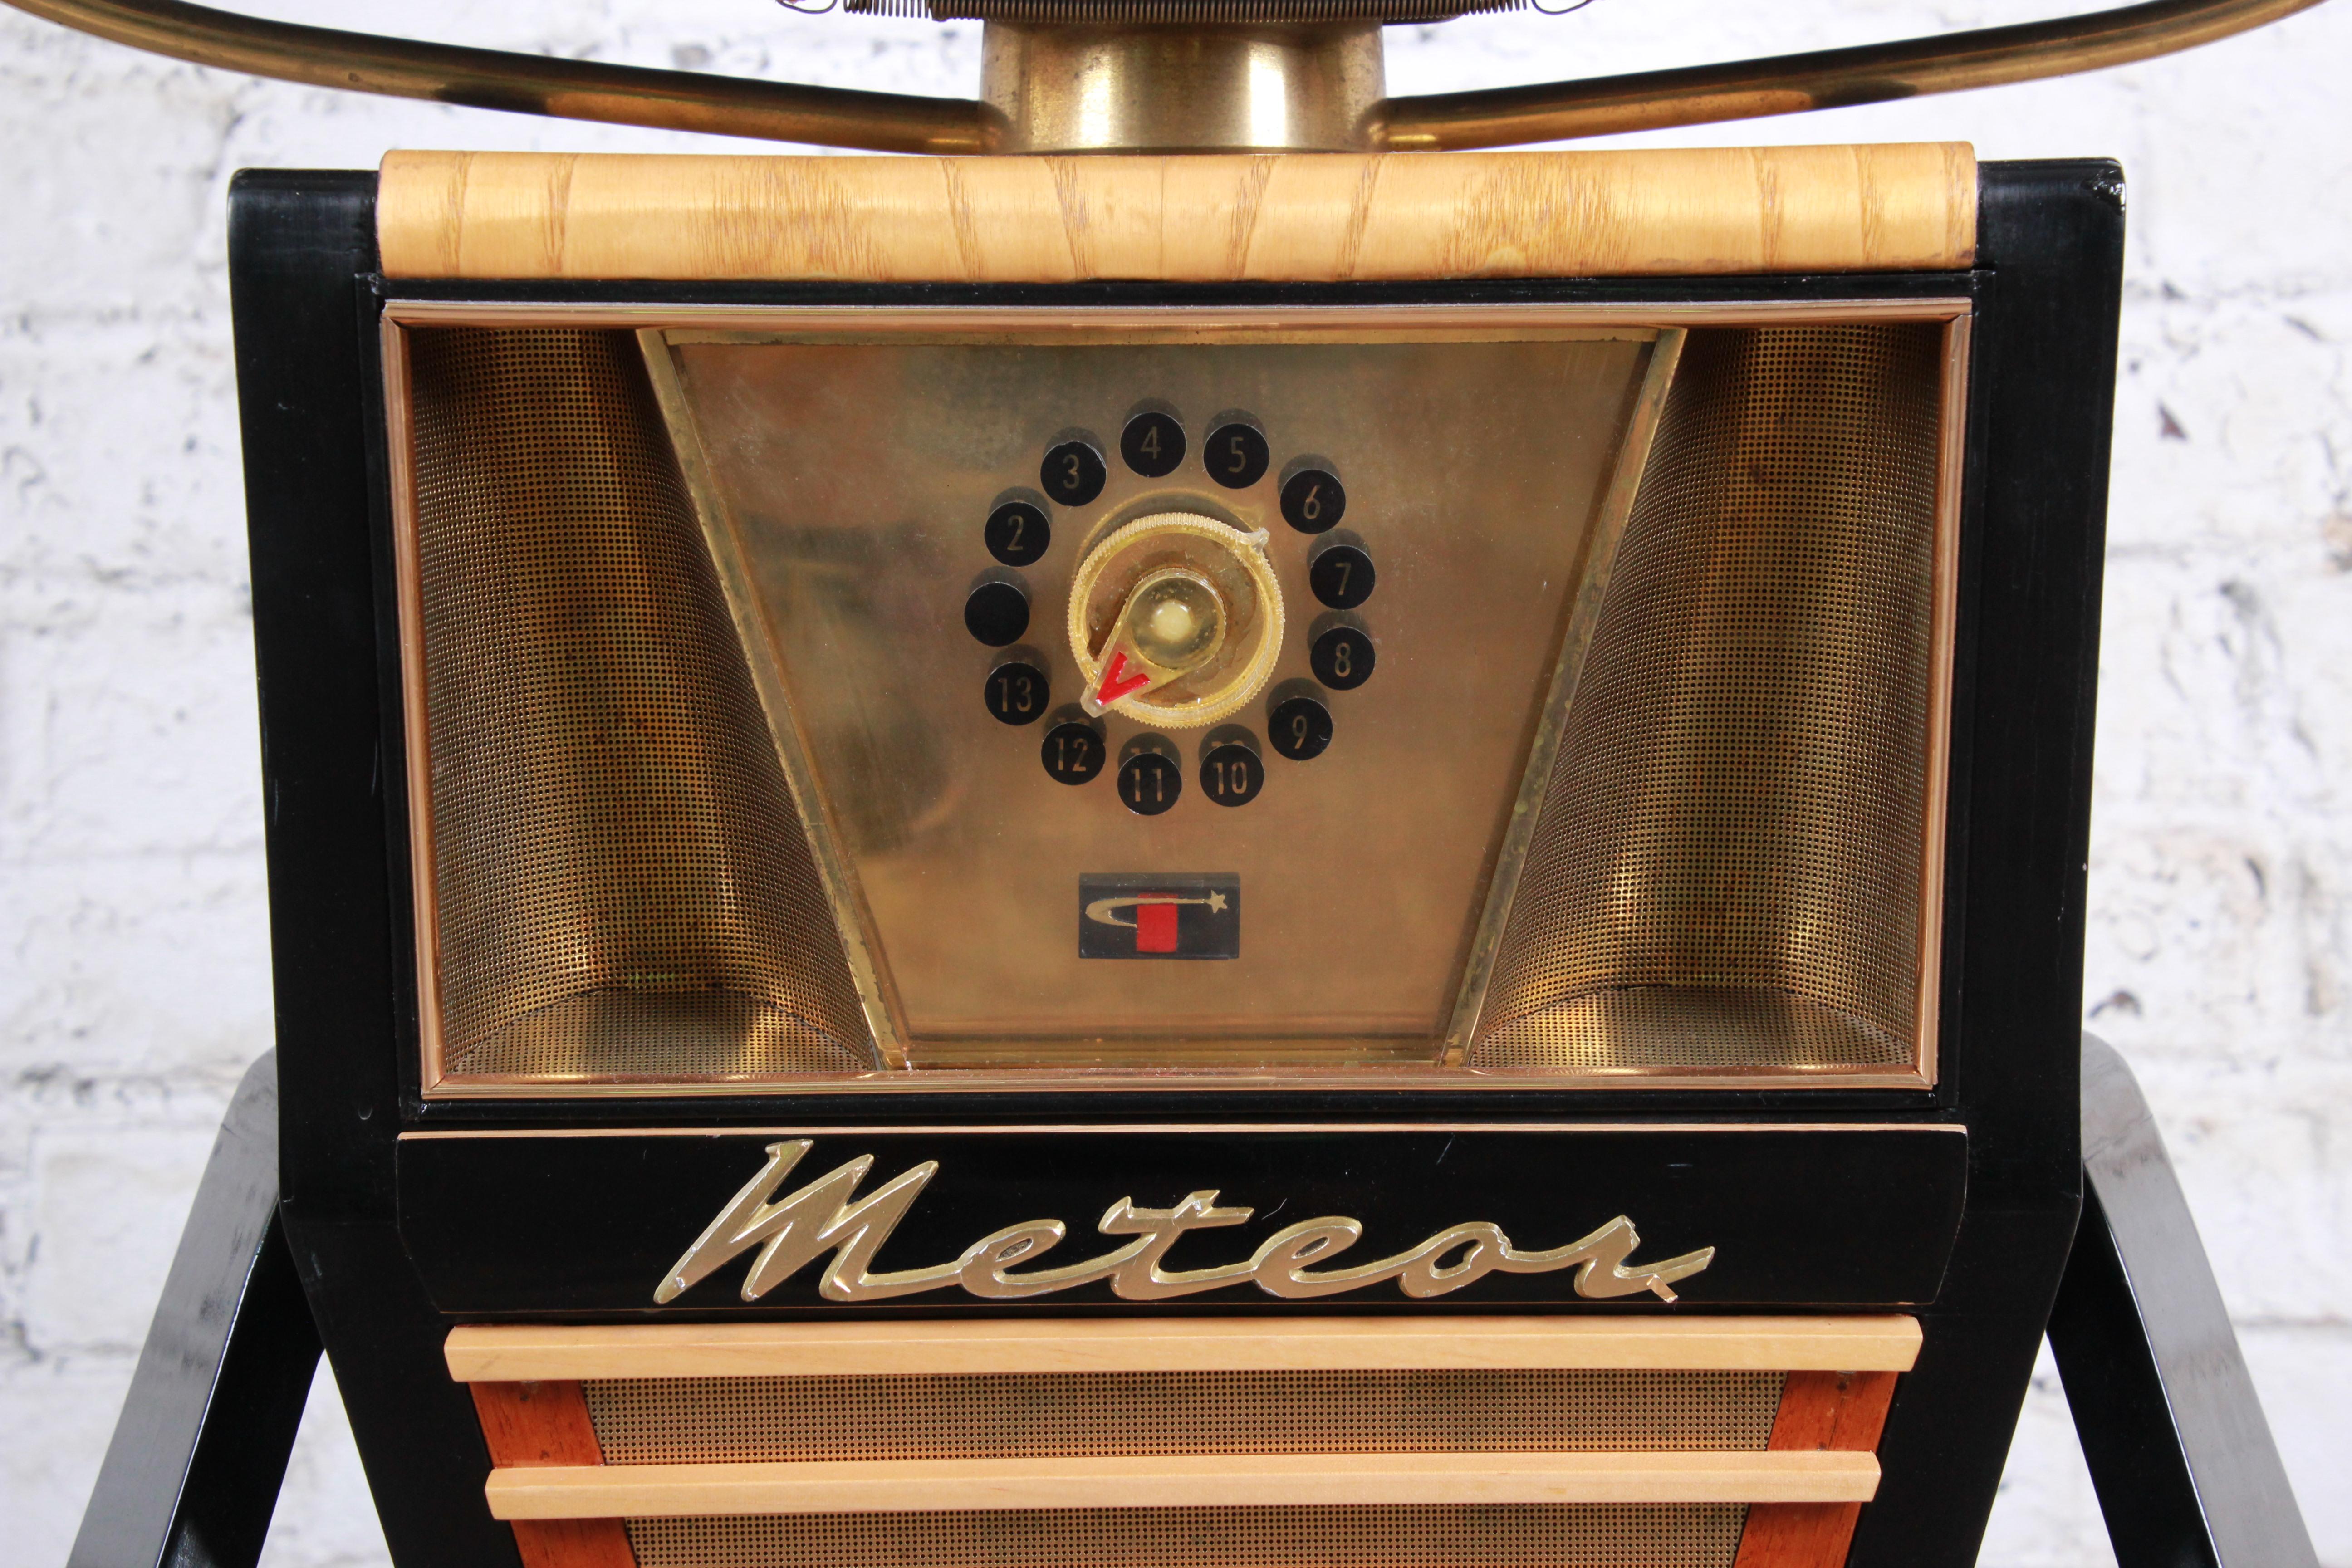 American Predicta Meteor Mid-Century Modern Space Age Television by Telstar